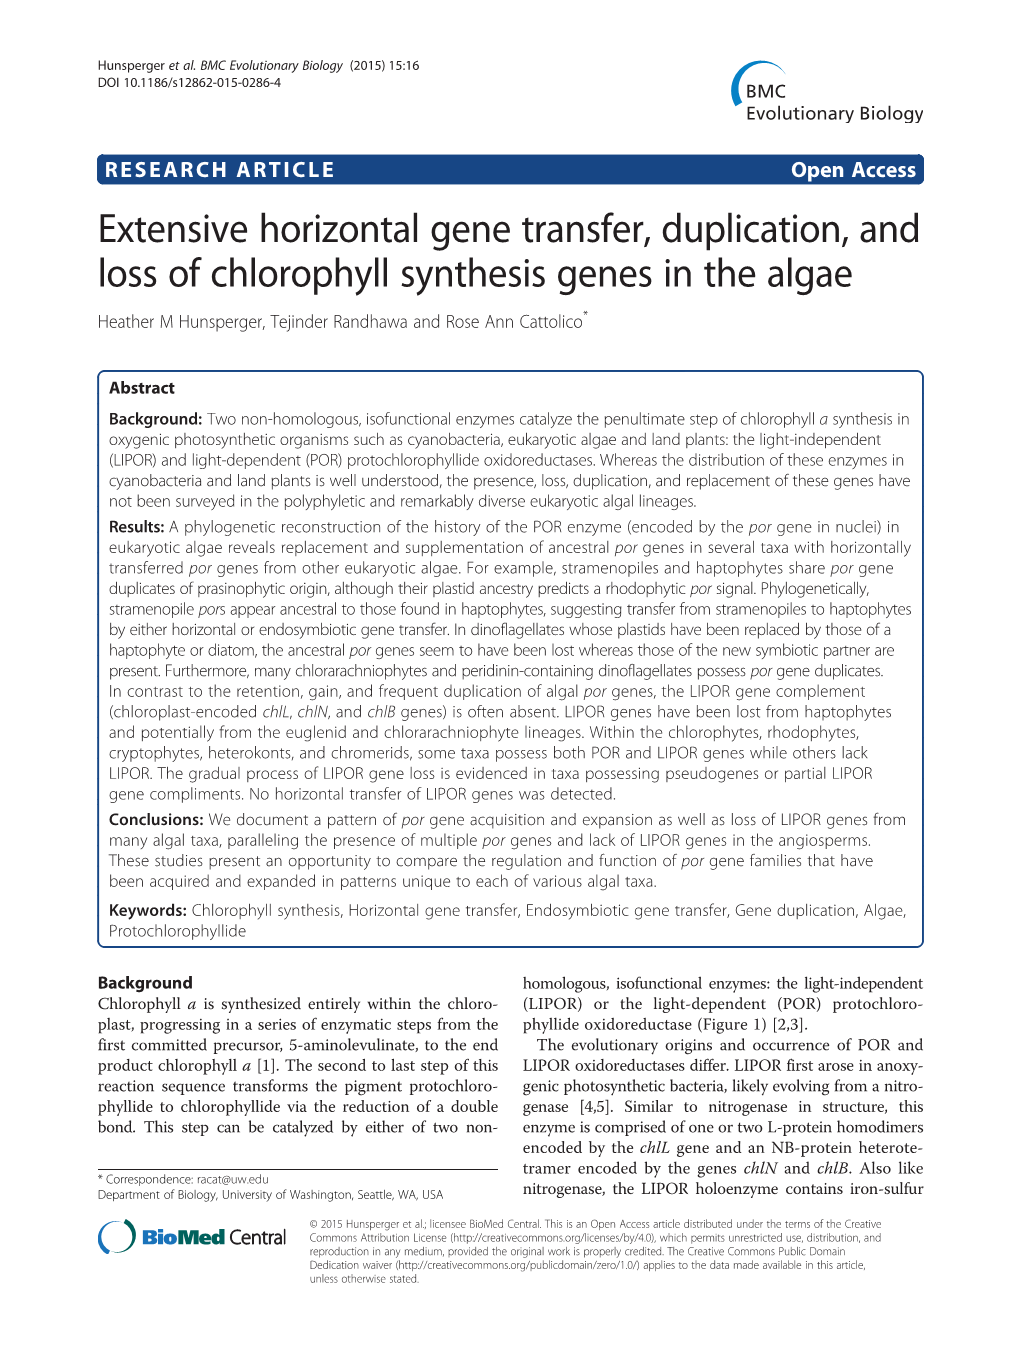 Extensive Horizontal Gene Transfer, Duplication, and Loss of Chlorophyll Synthesis Genes in the Algae Heather M Hunsperger, Tejinder Randhawa and Rose Ann Cattolico*